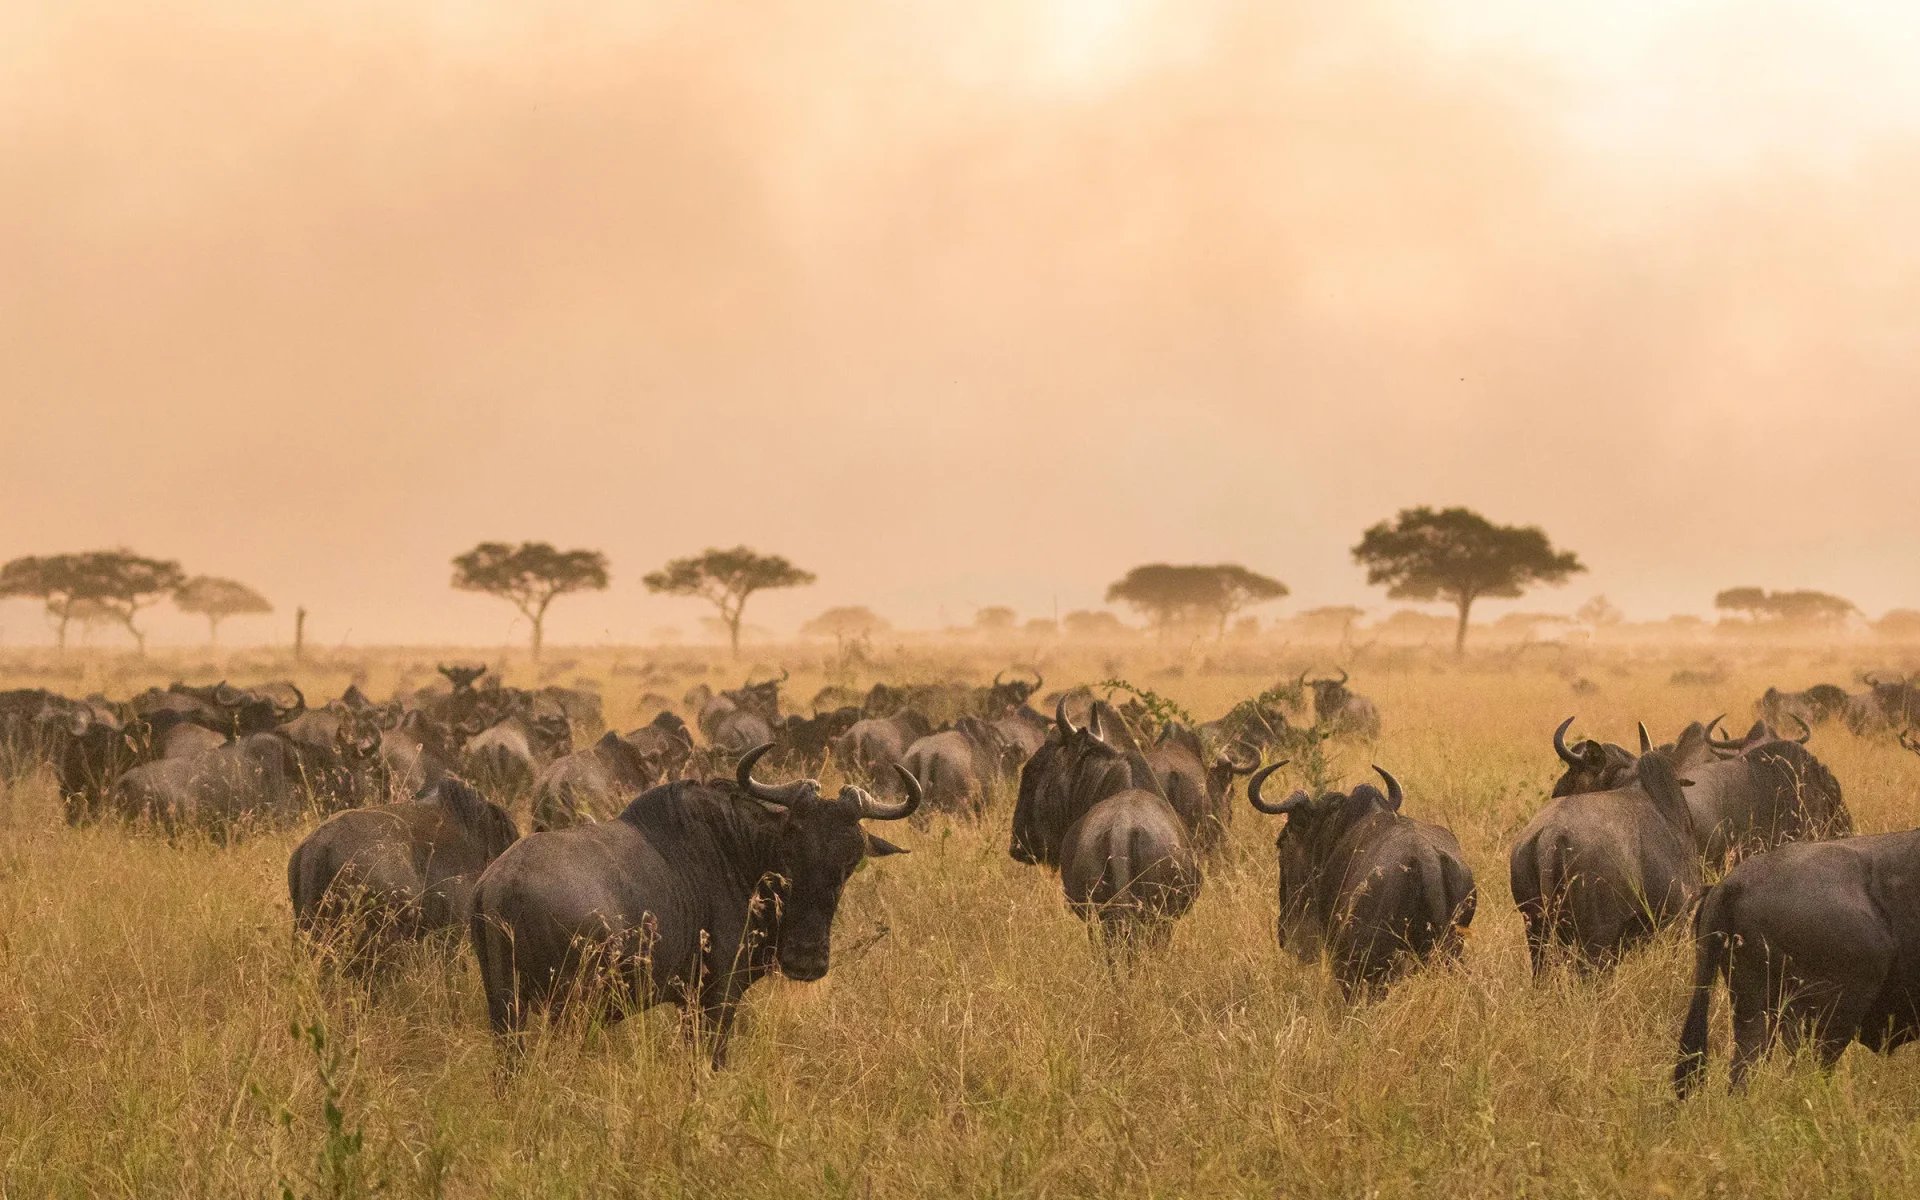 A group of wildebeest stand in the Serengeti in Tanzania, gazing back at the camera.